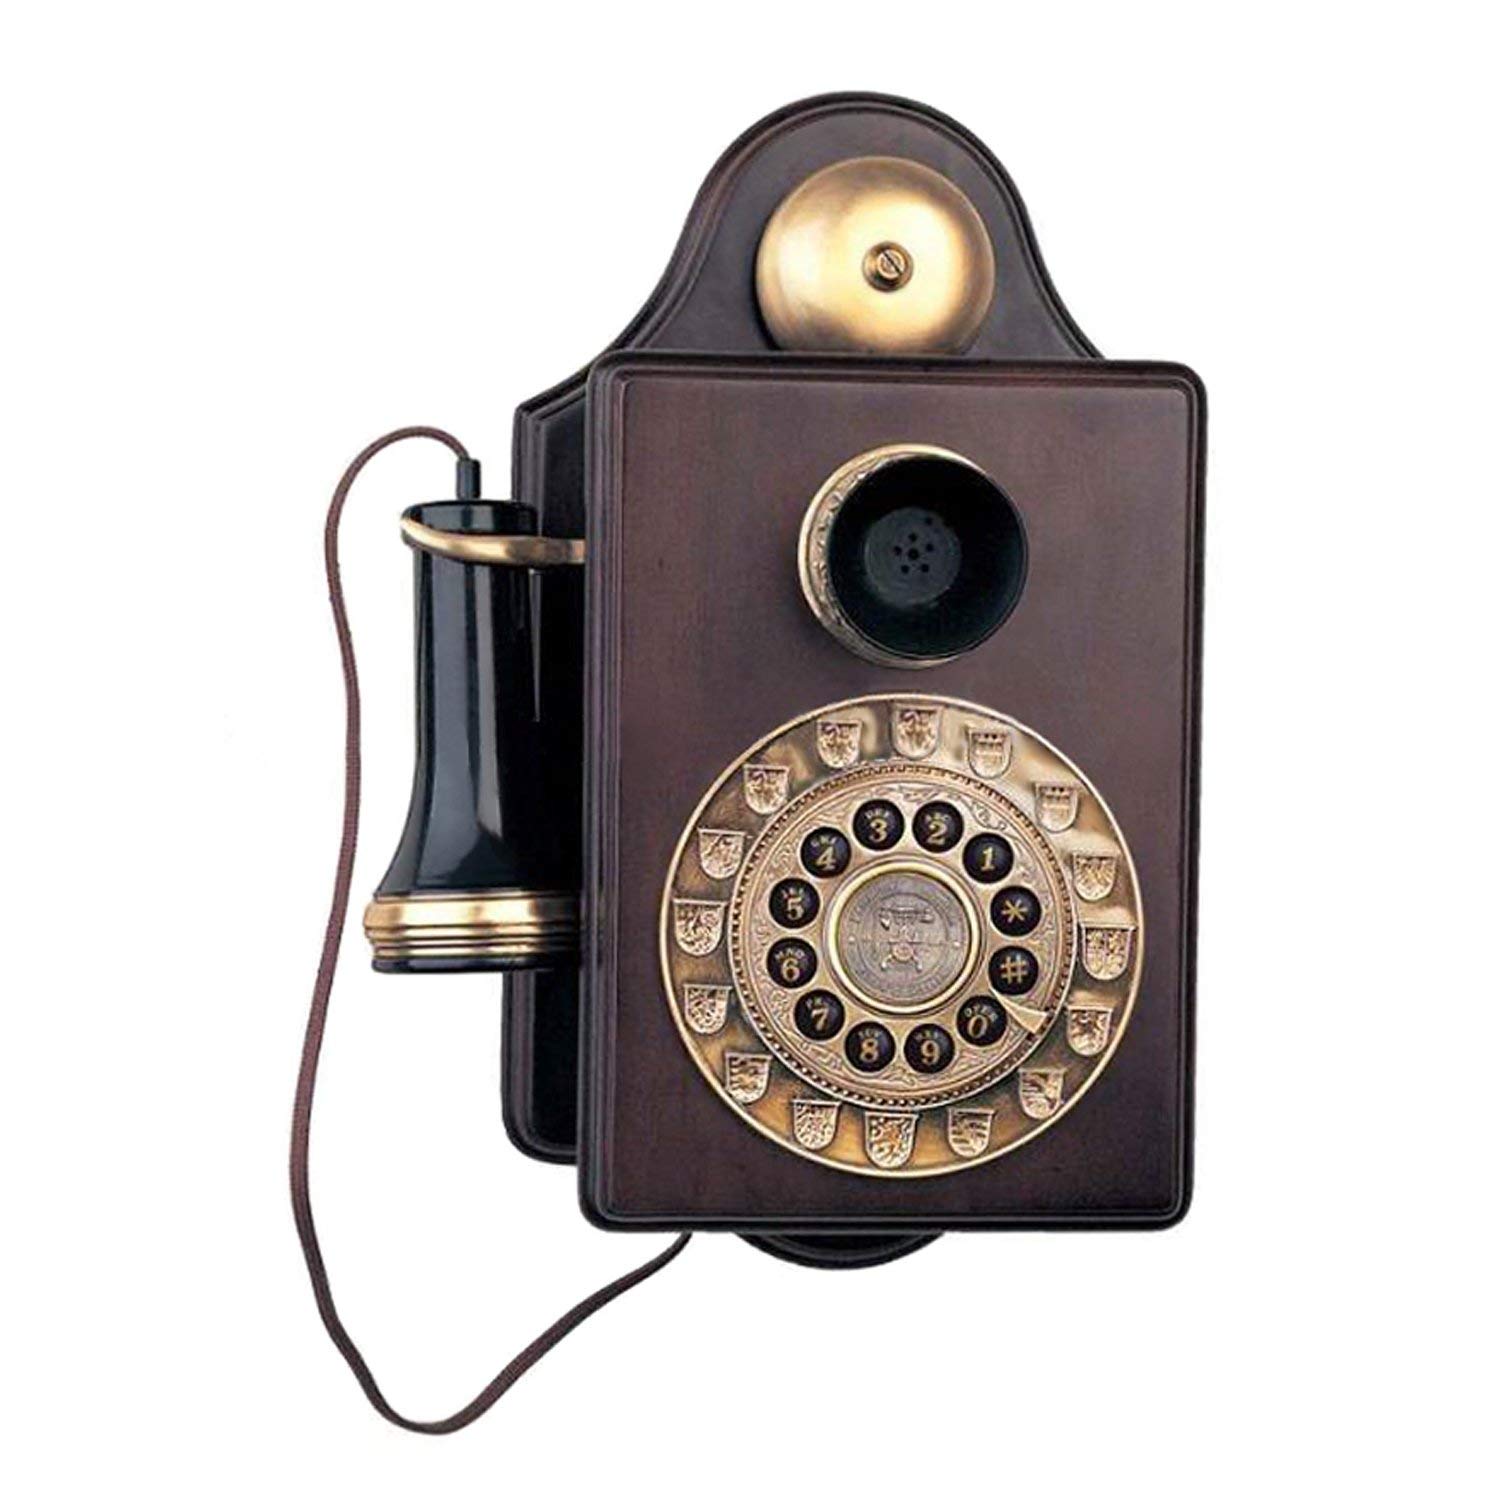 PARAMOUNT 1903 ANTIQUE VINTAGE LOOK REPRODUCTION WALL WOODEN PHONE ...